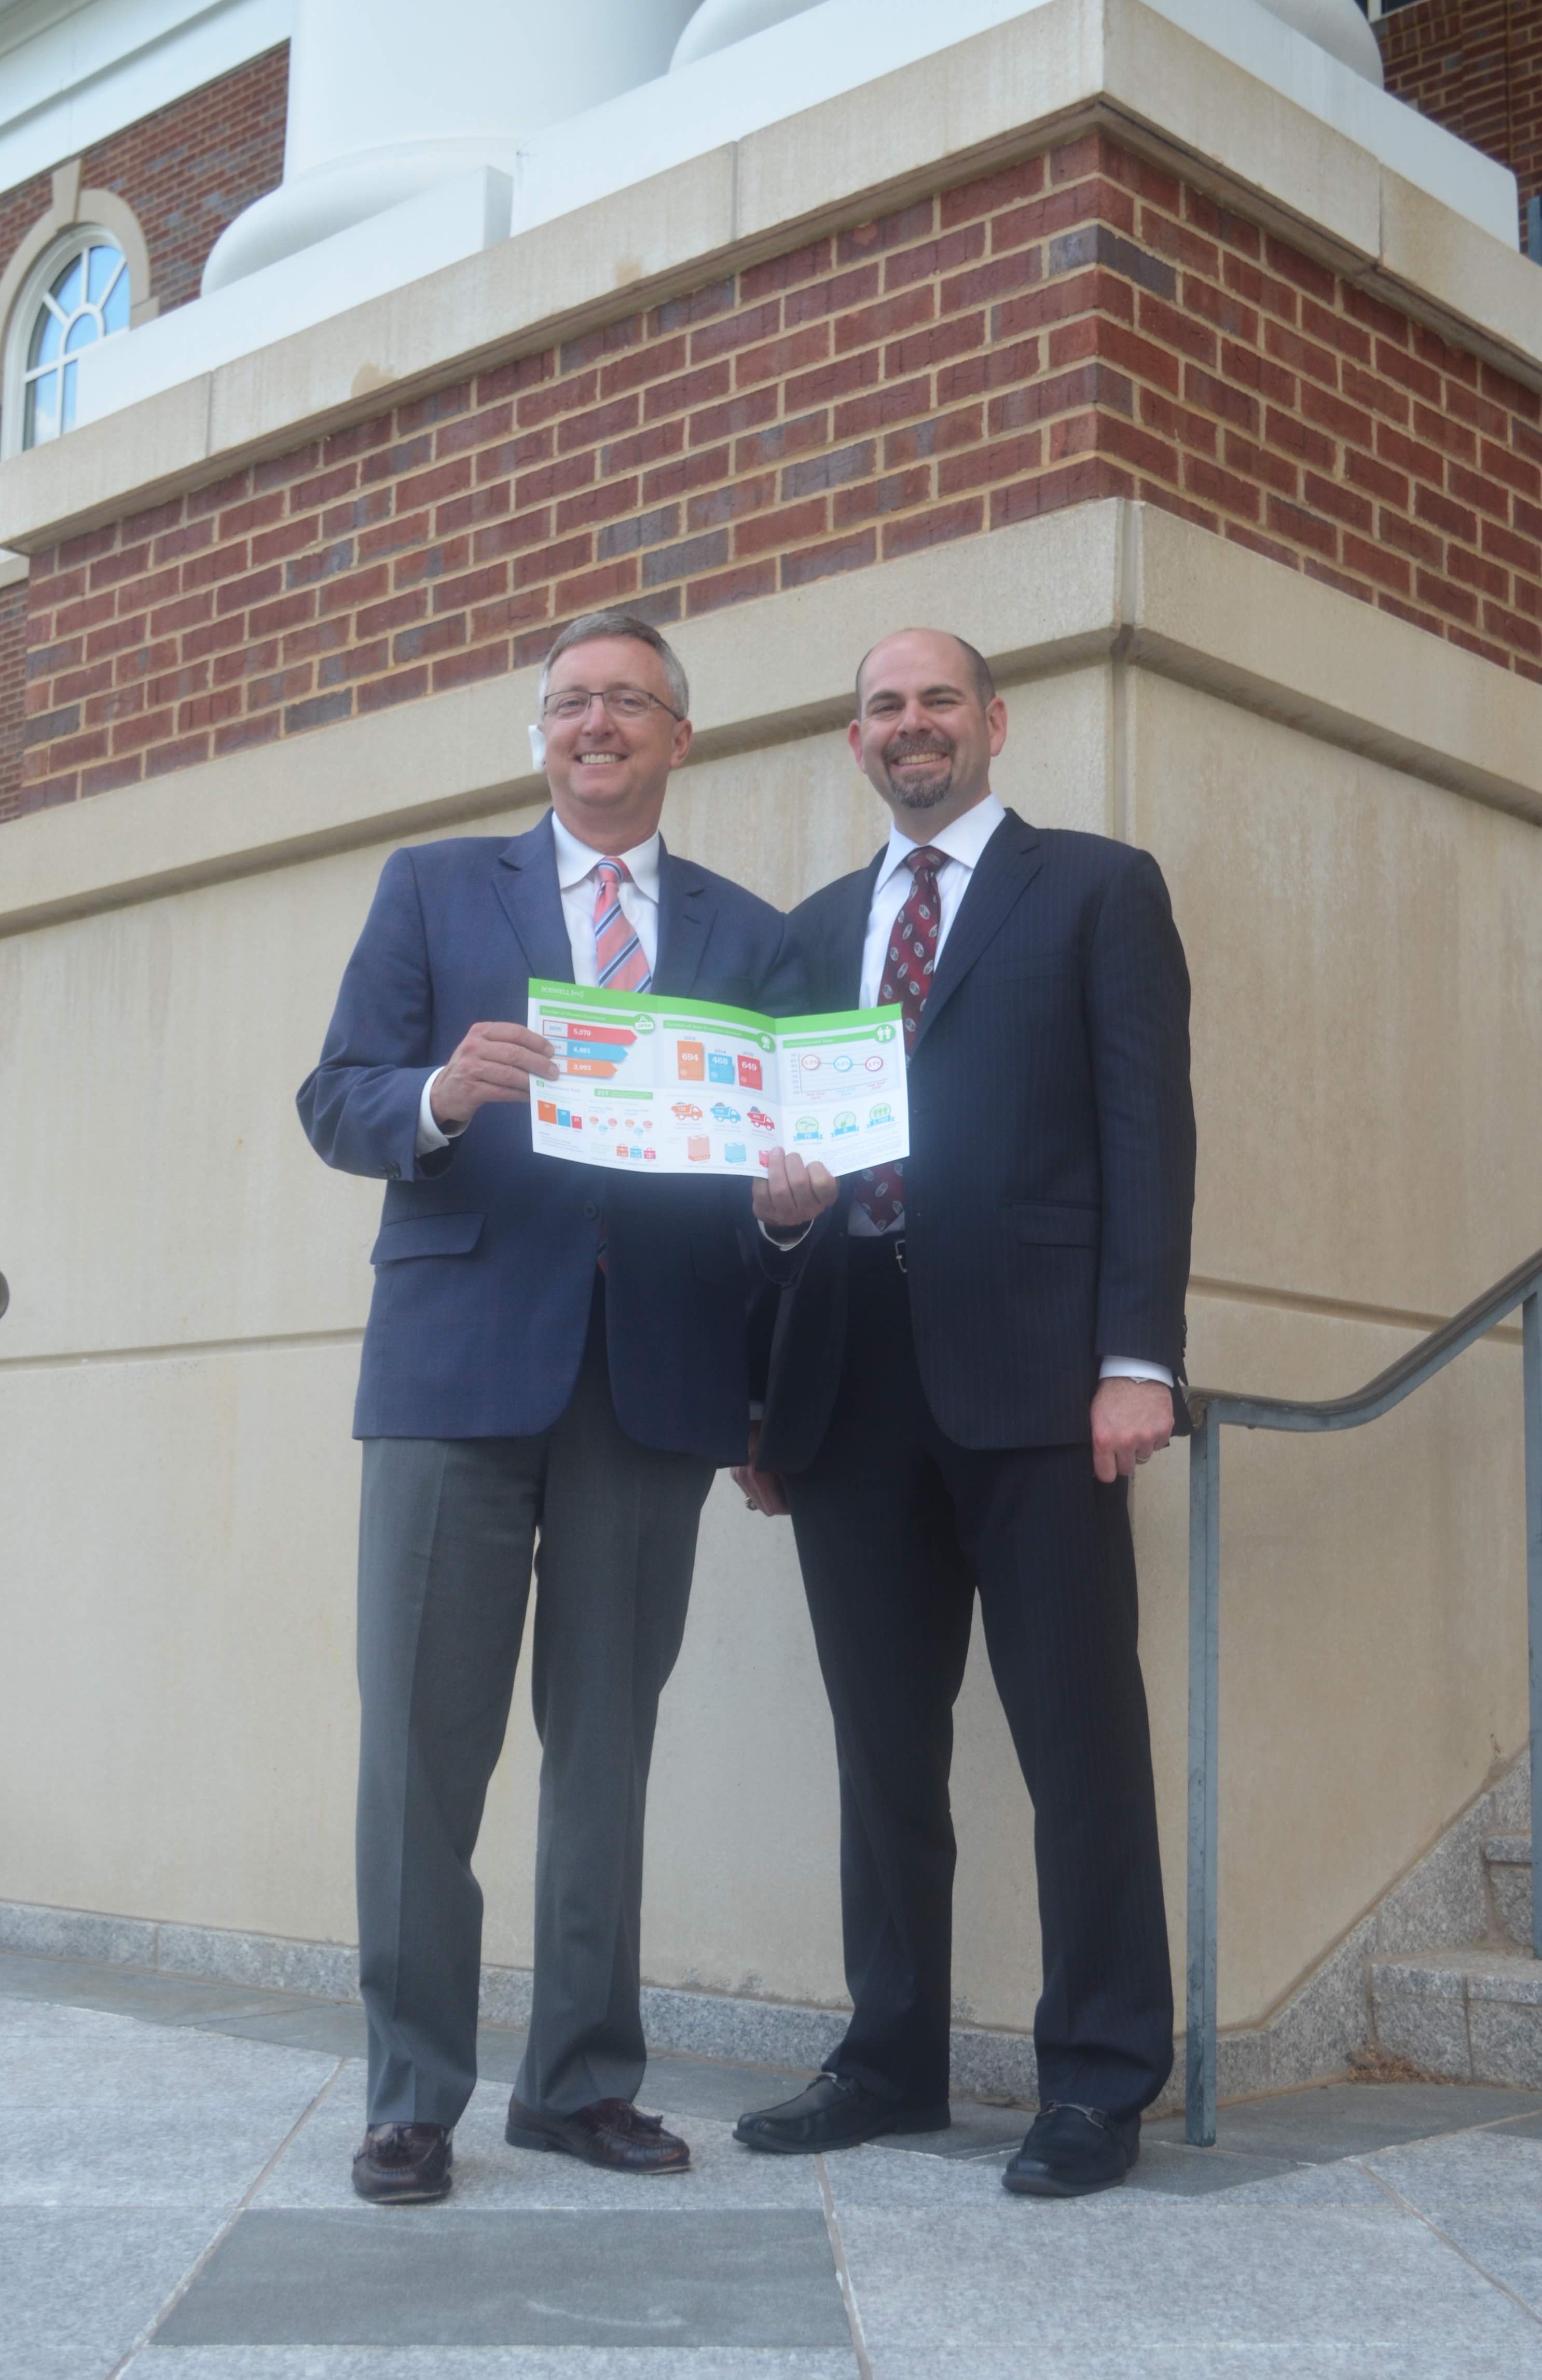 Steve Stroud, executive director of Roswell Inc and Kyle Talente, principal of RKG Associates